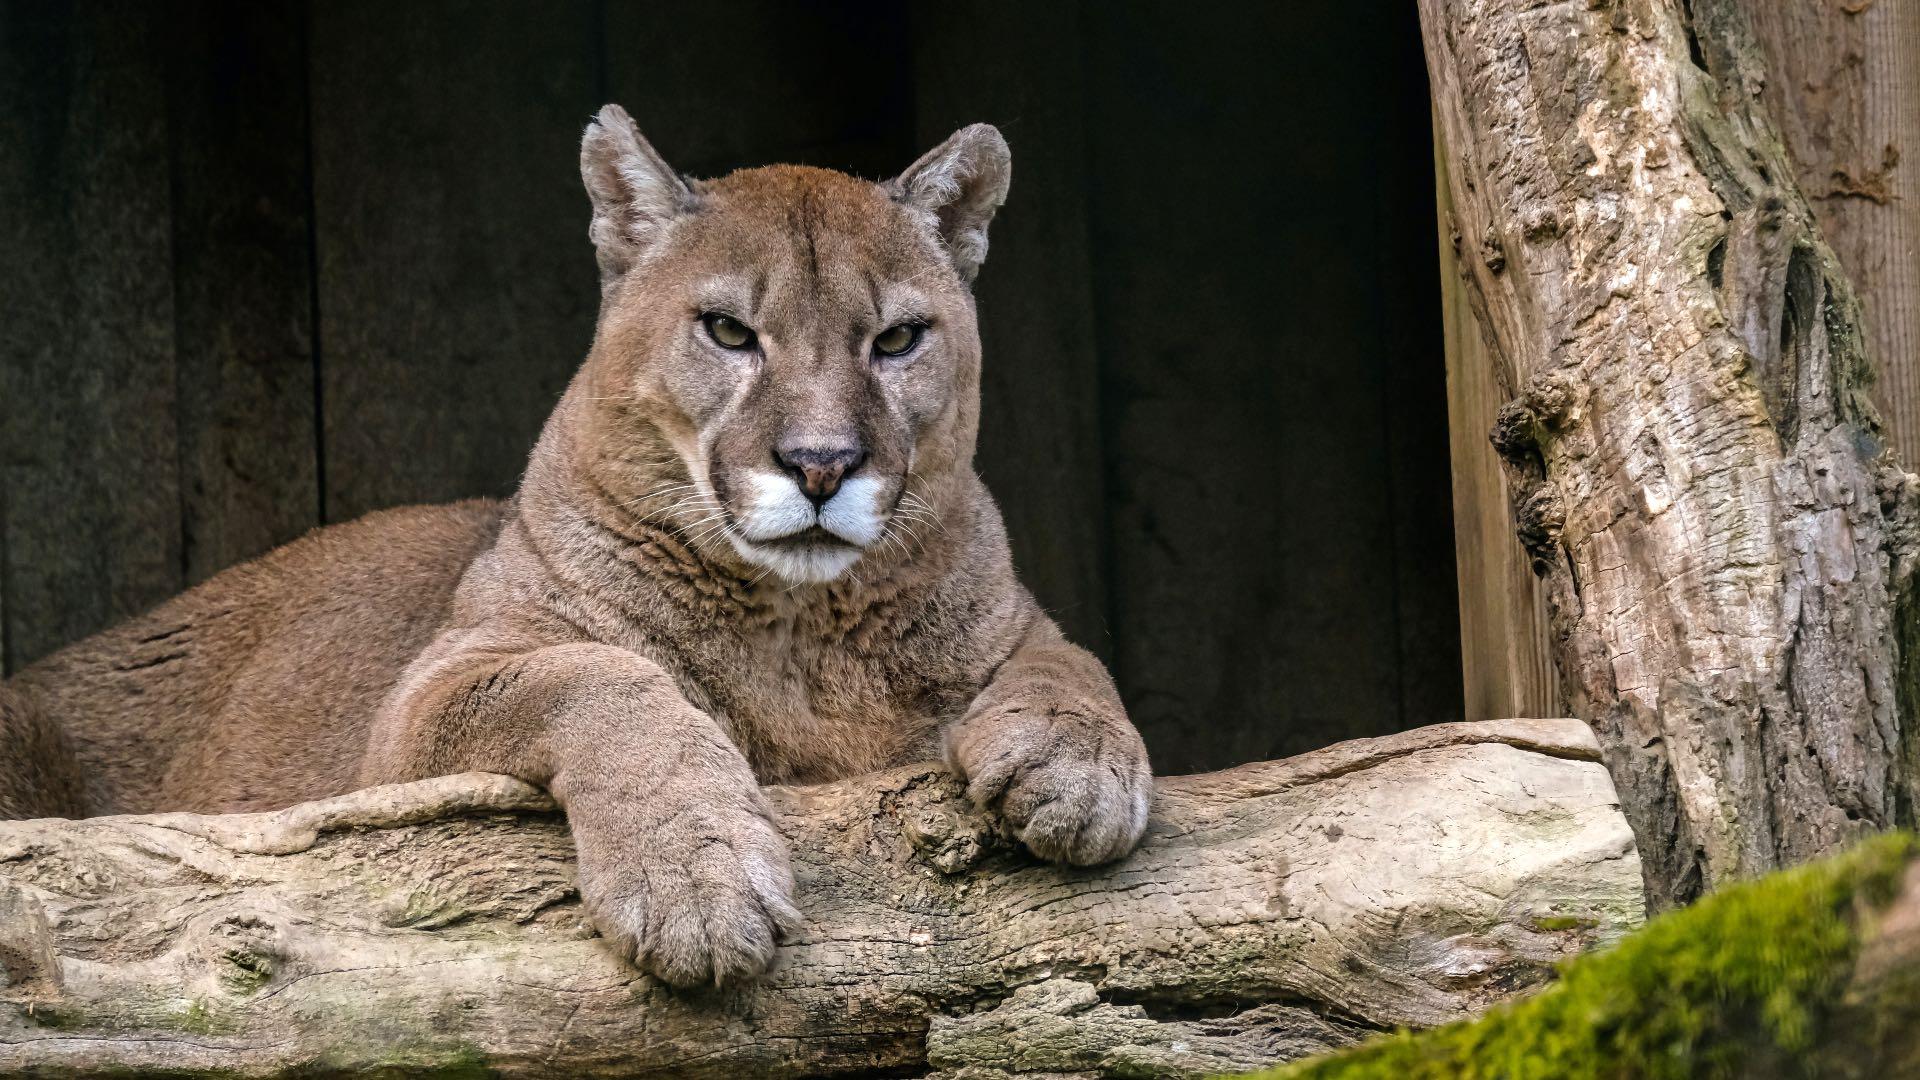 A mountain lion, also known as a cougar, puma or panther. (Nicky Pe / Pexels)